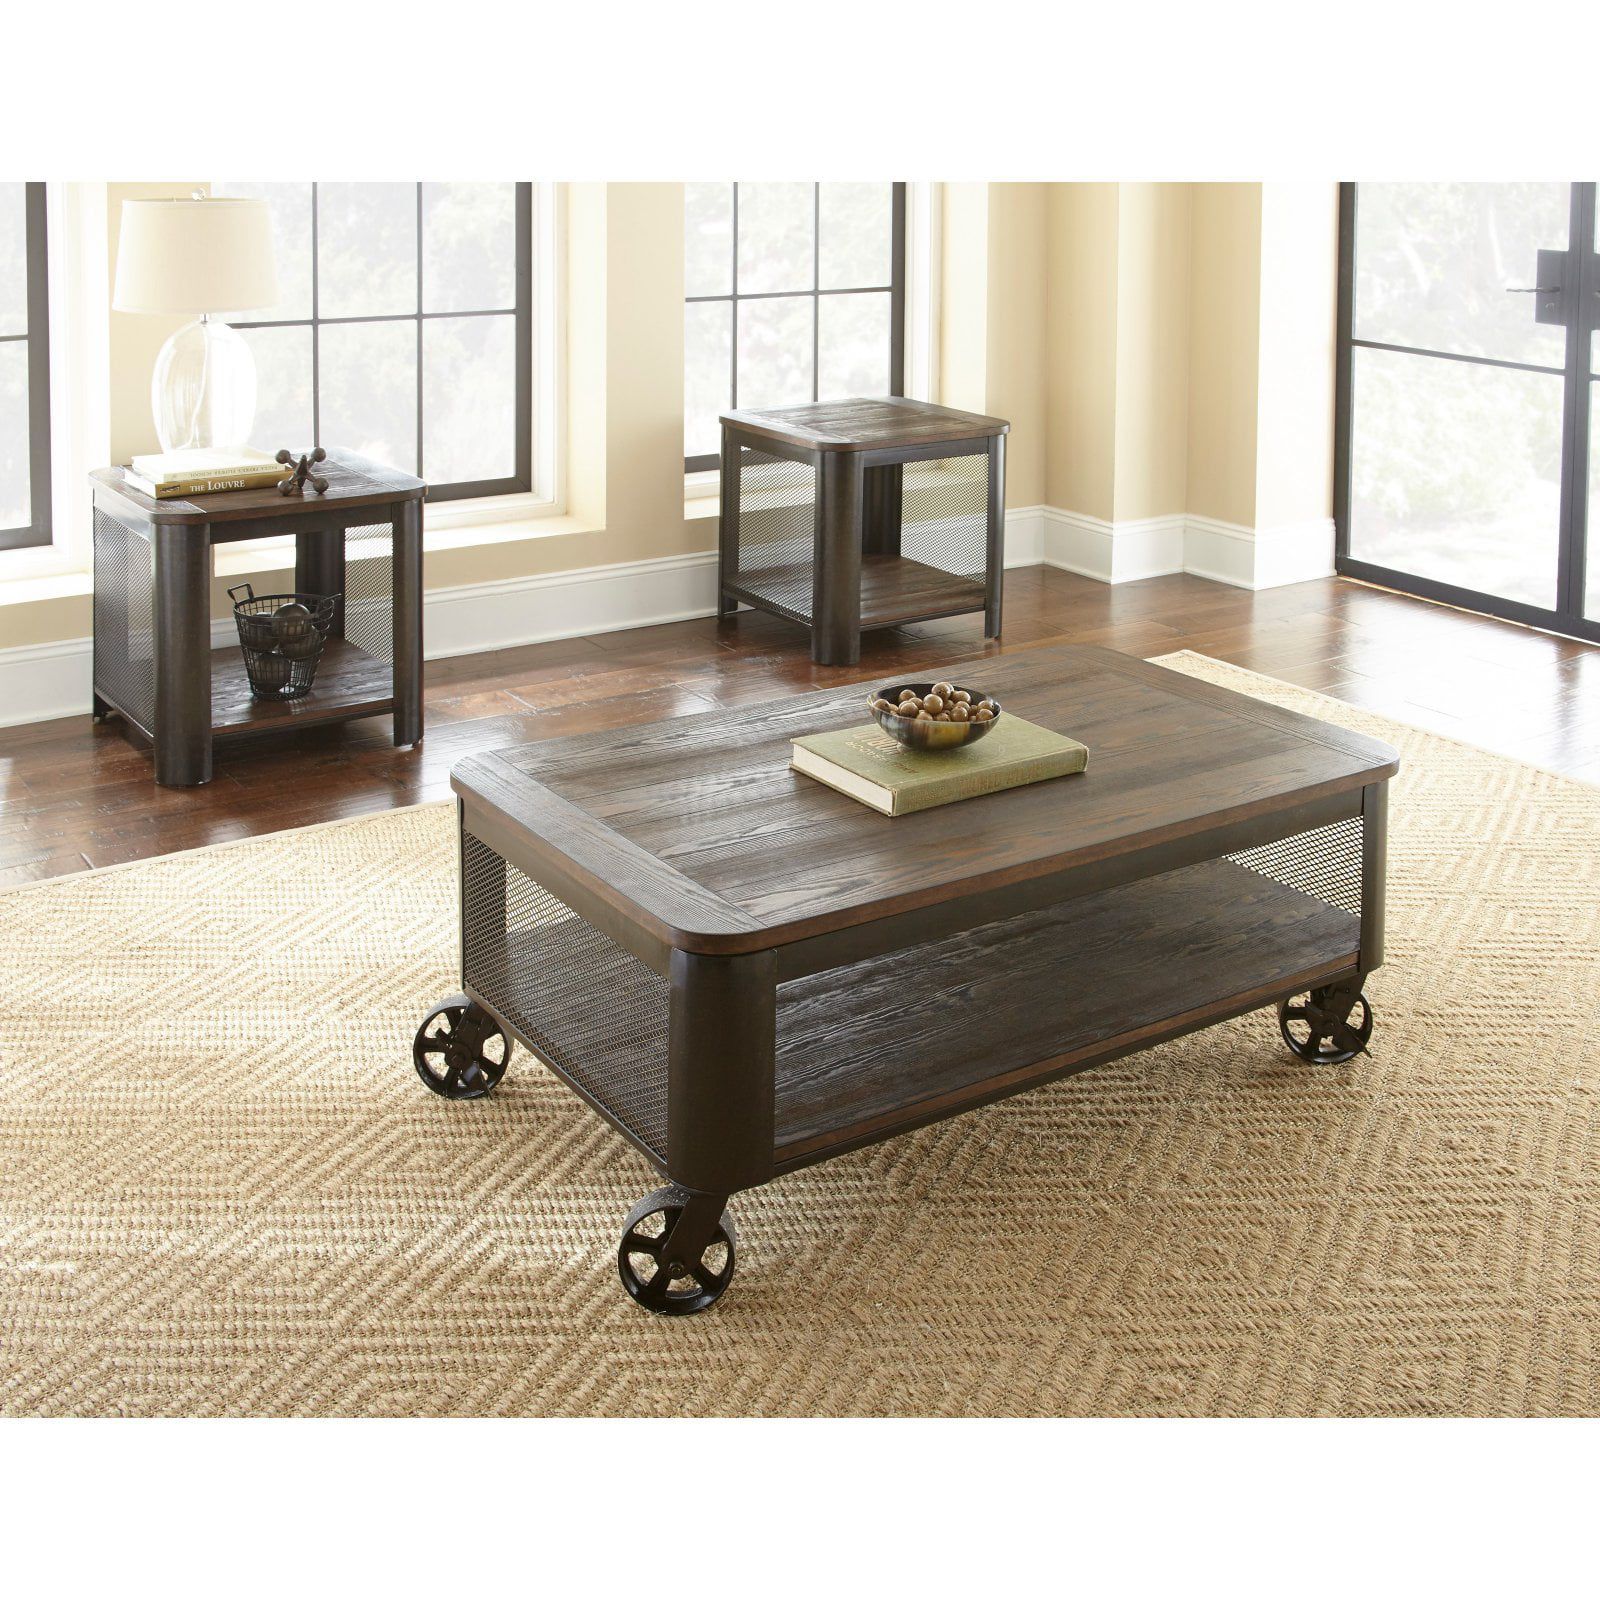 Barrow Lift Top Cocktail Table With Casters – Walmart Throughout Coffee Tables With Casters (Gallery 11 of 21)